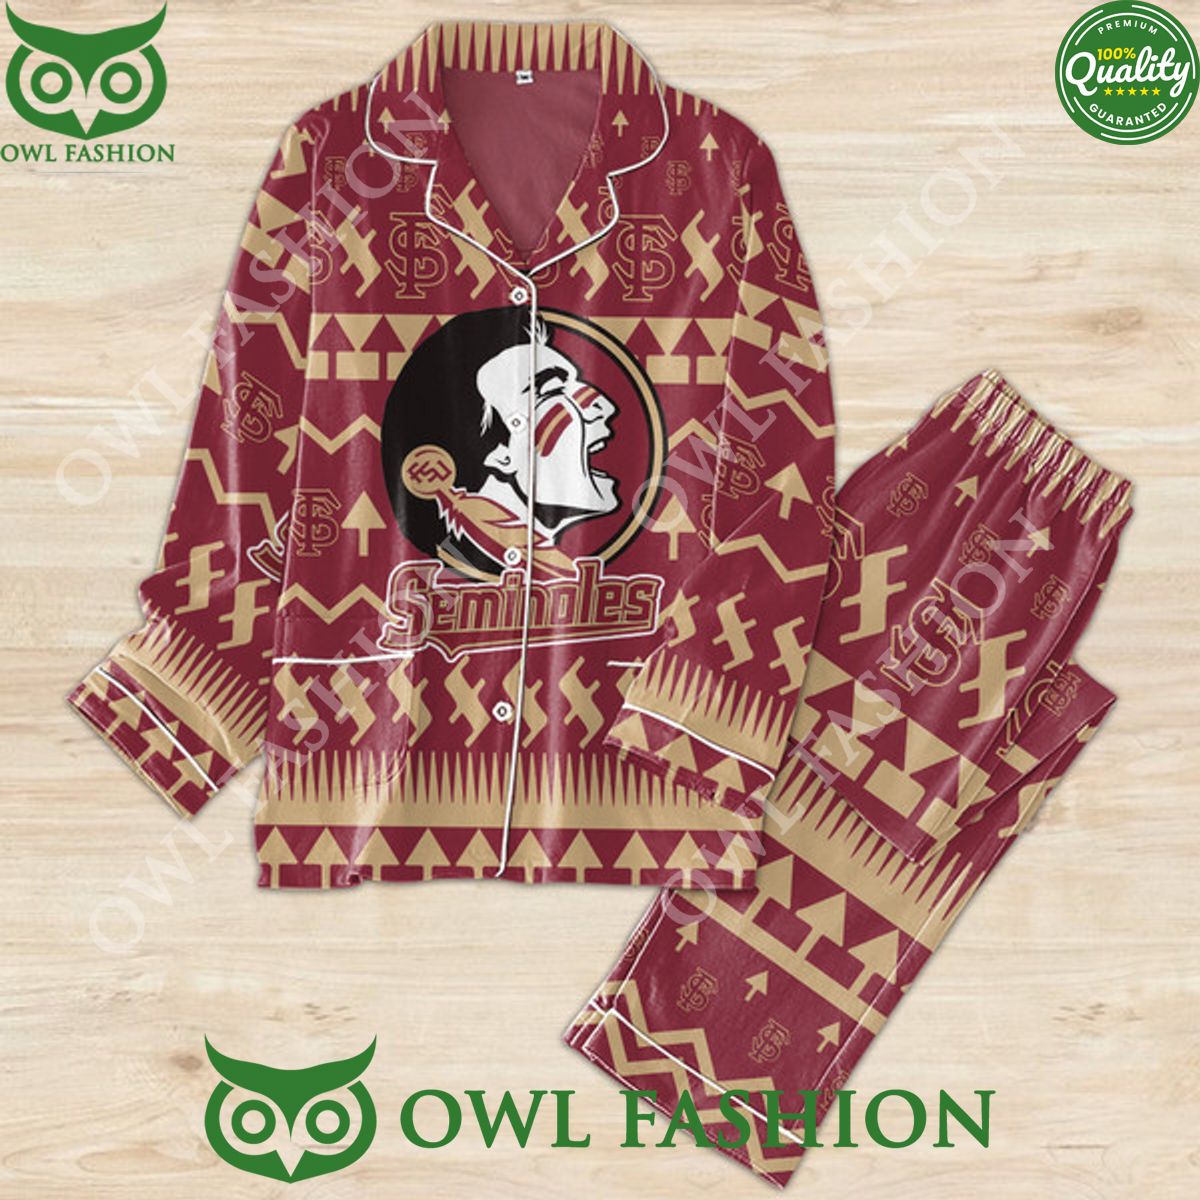 Florida State Seminoles football NCAA Pajamas set This is awesome and unique